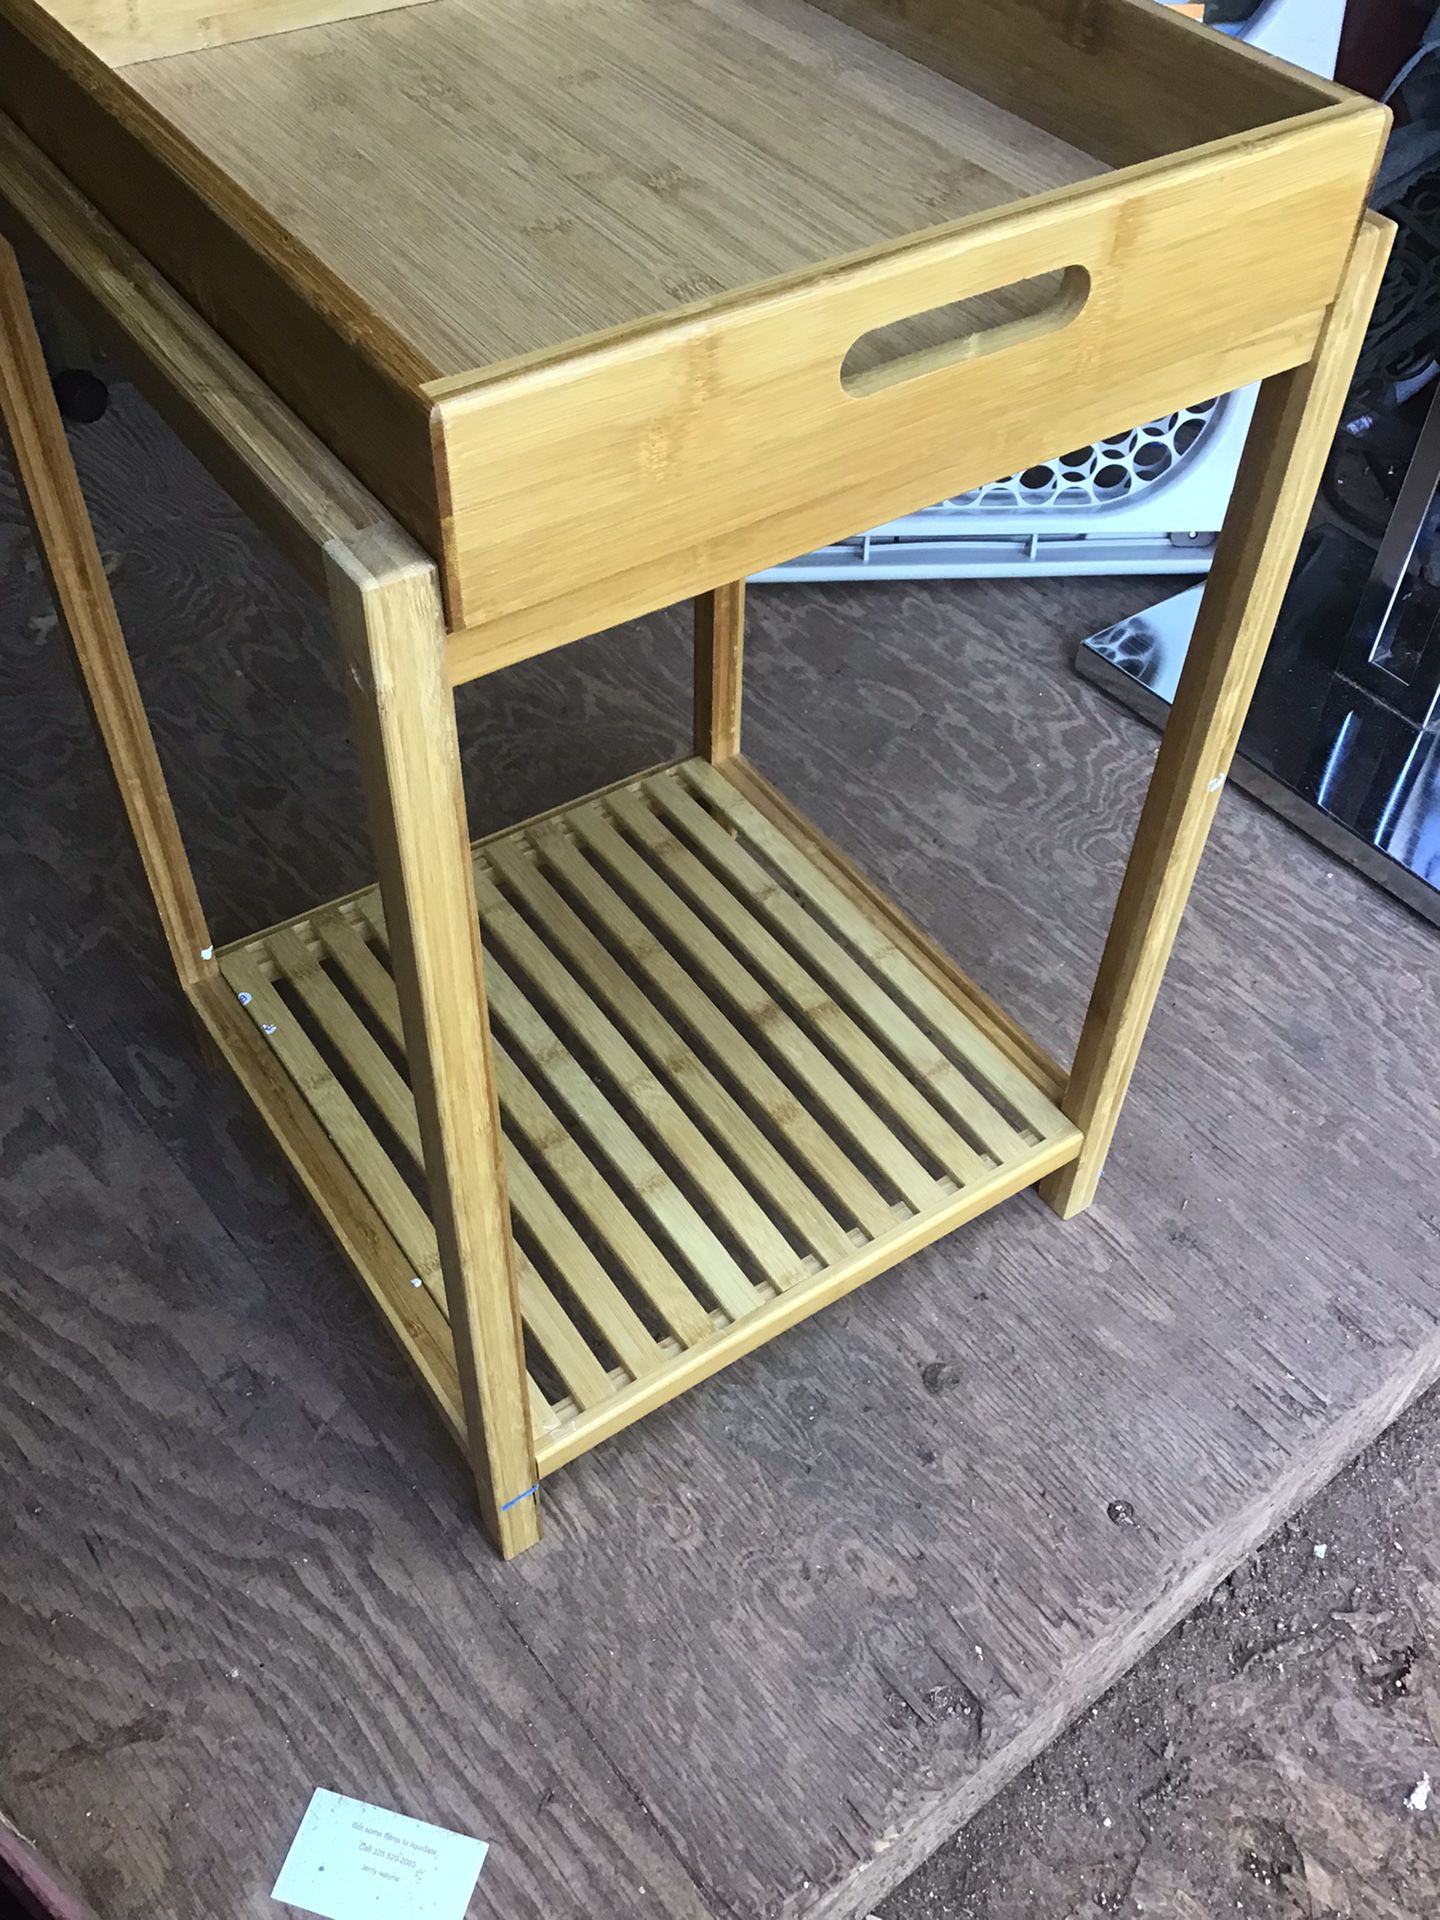 A Bamboo Stand With A Breakfast Tray Its 26 Inches Tall 16 Inches Wide And 16 Inches Deep